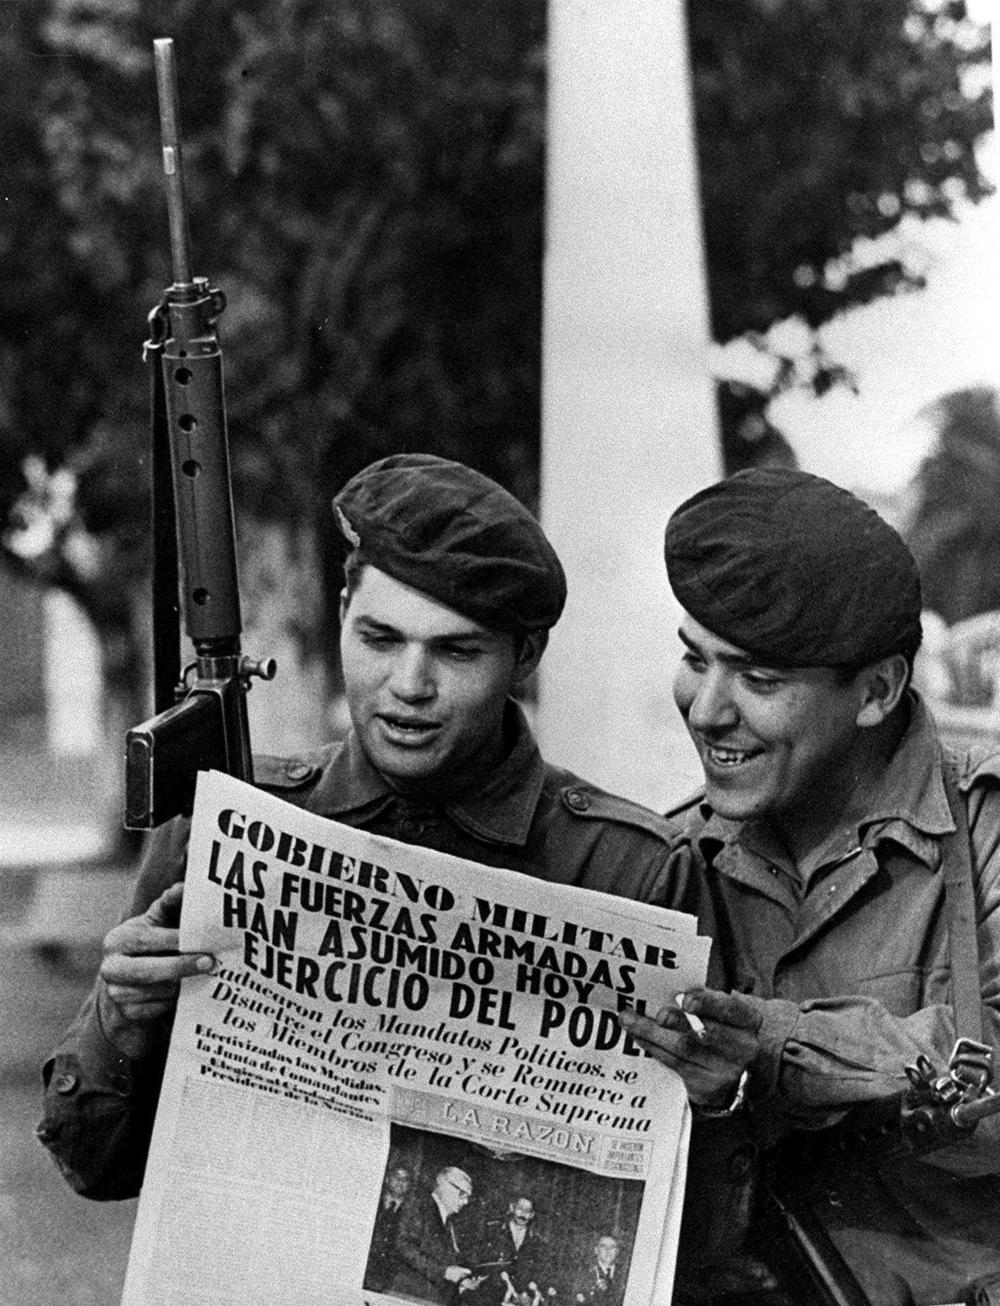 In March 1976, two soldiers read a newspaper in the Buenos Aires Plaza de Mayo after a military coup led by Gen. Jorge Rafael Videla ousted President Isabel Peron. The newspaper headline reads in Spanish; 